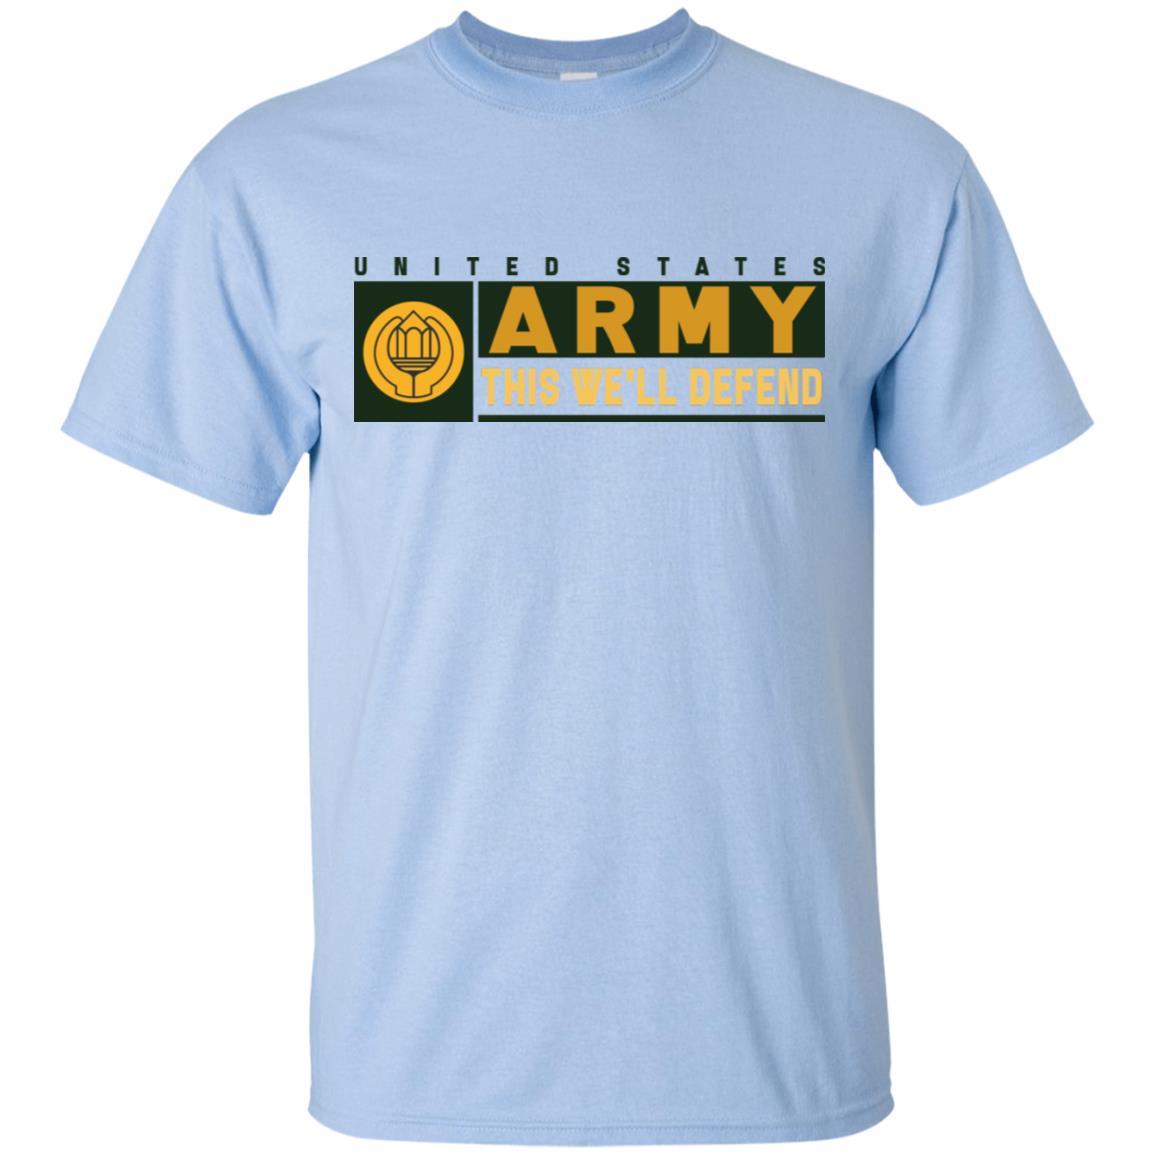 U.S Army Chaplain Assistant- This We'll Defend T-Shirt On Front For Men-TShirt-Army-Veterans Nation